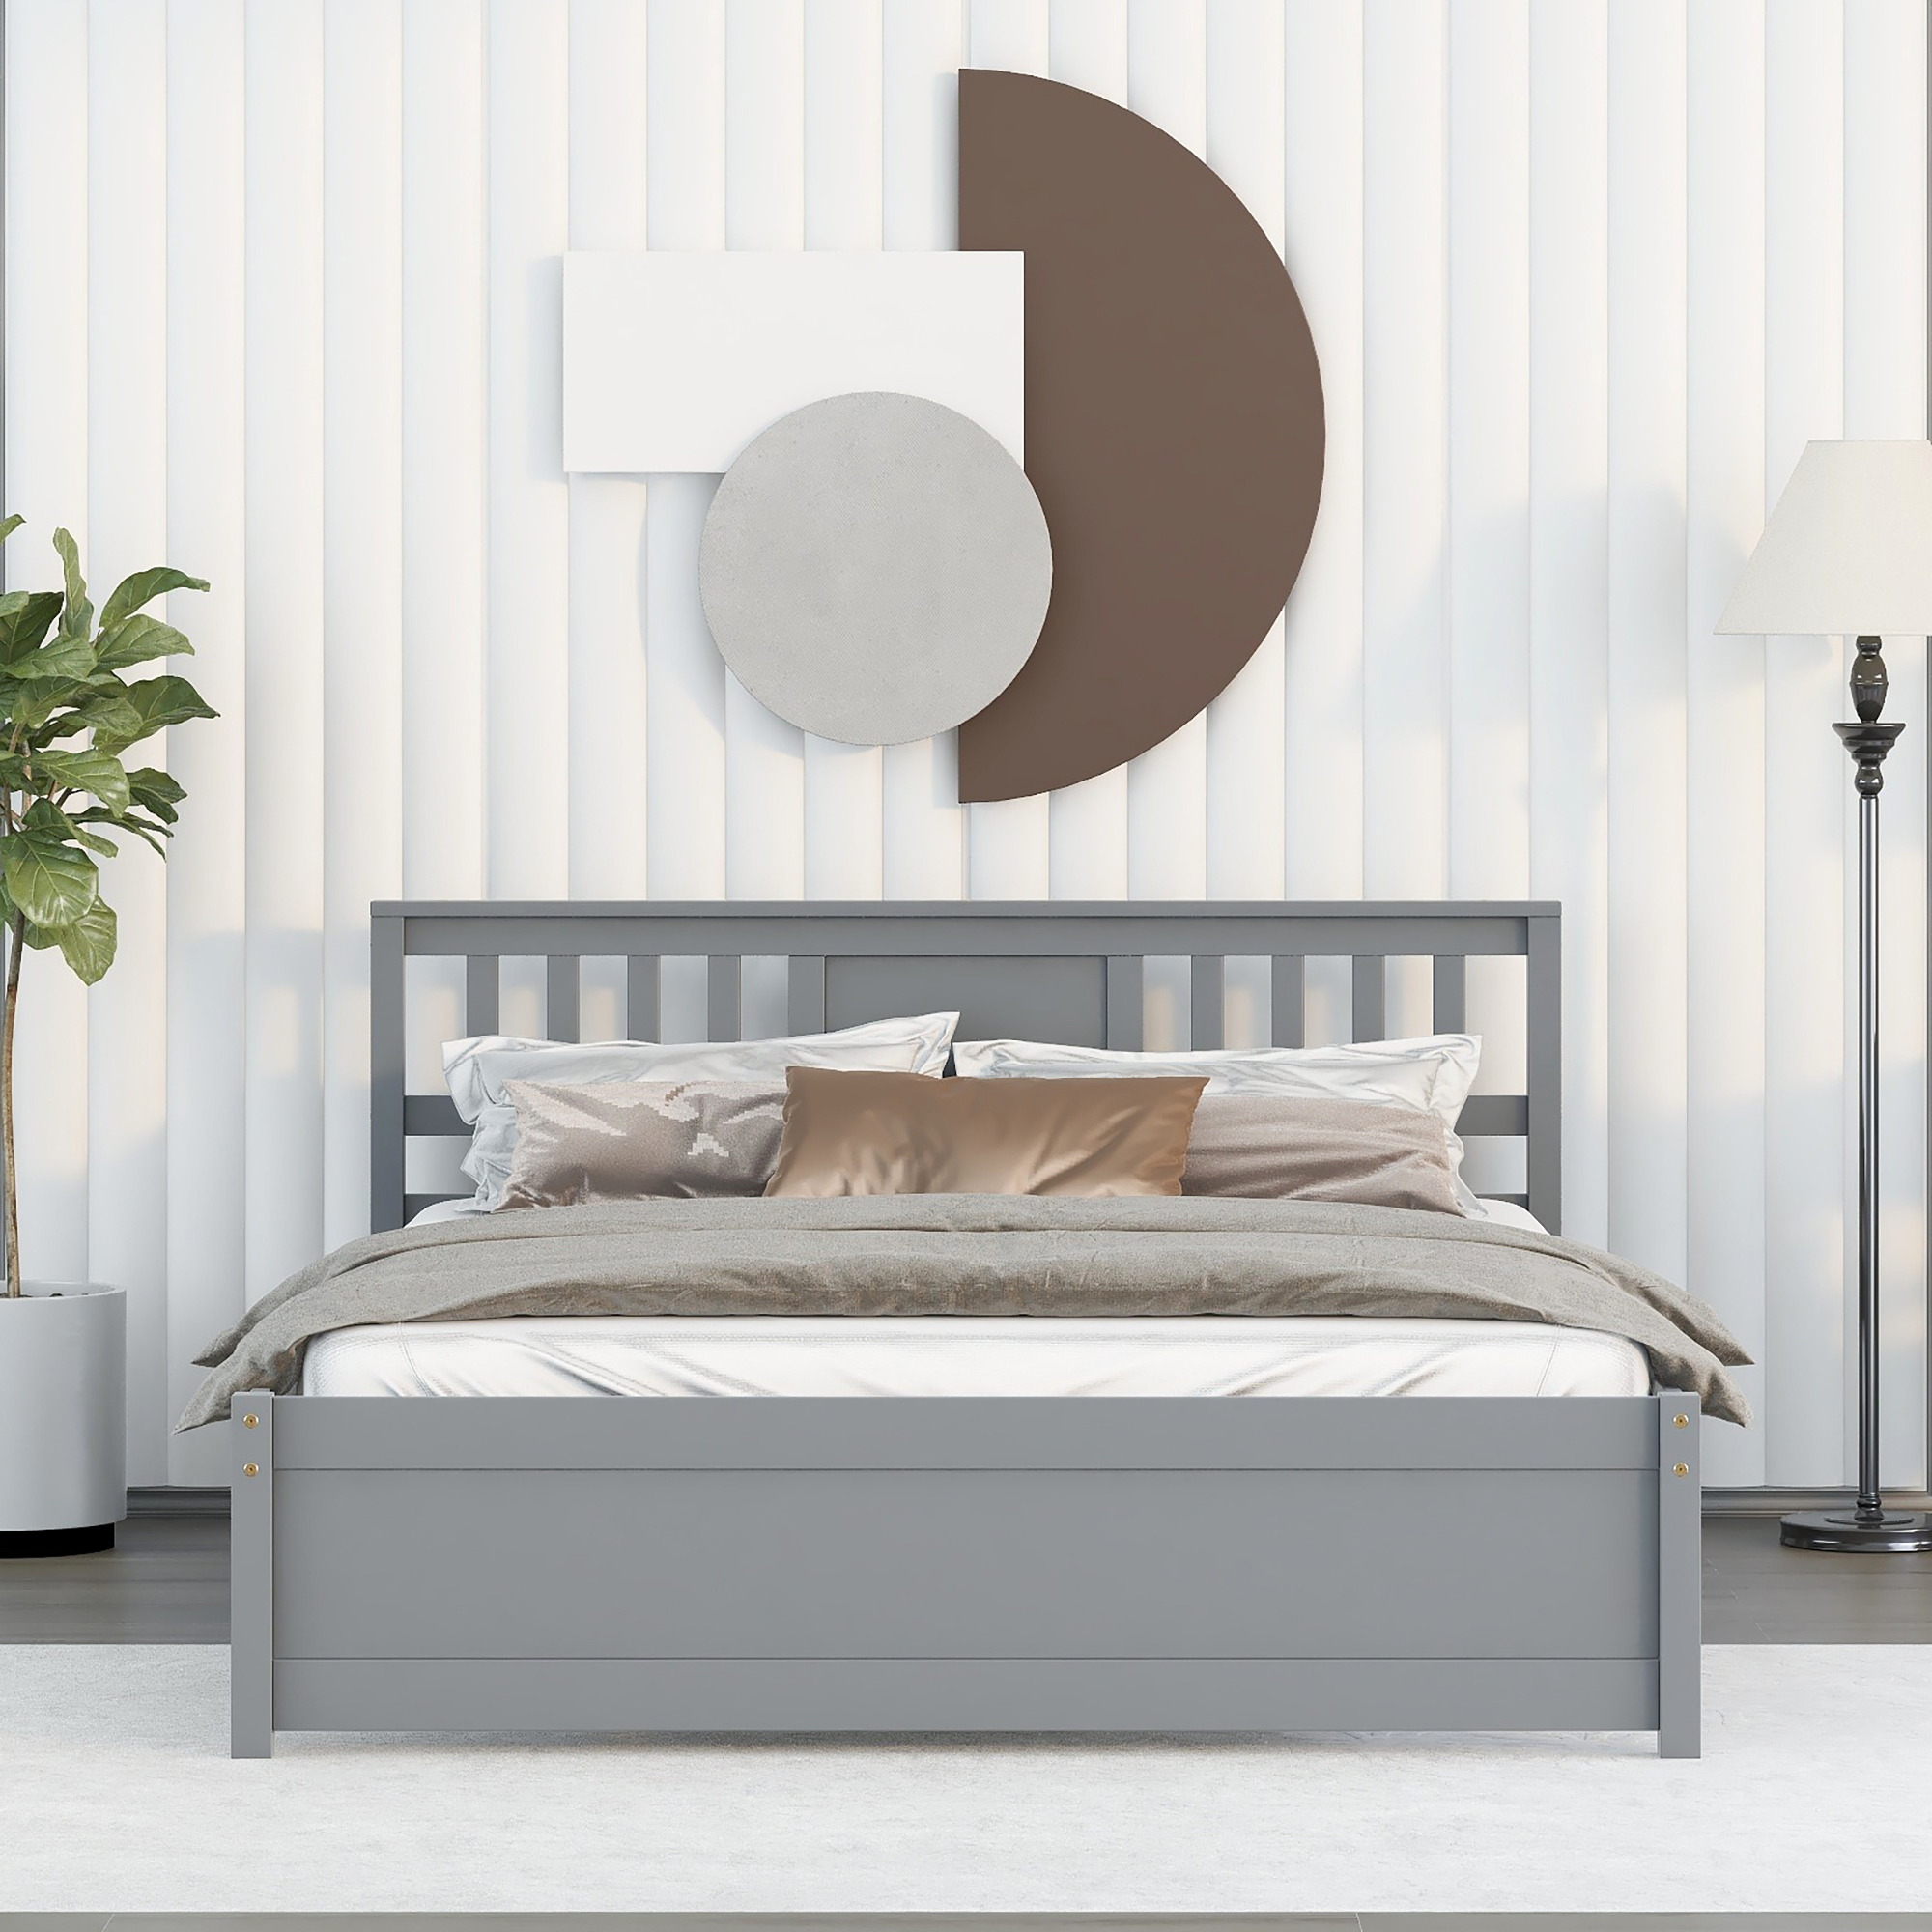 Modern design Wood Platform Queen Bed Frame with Headboard for Gray color